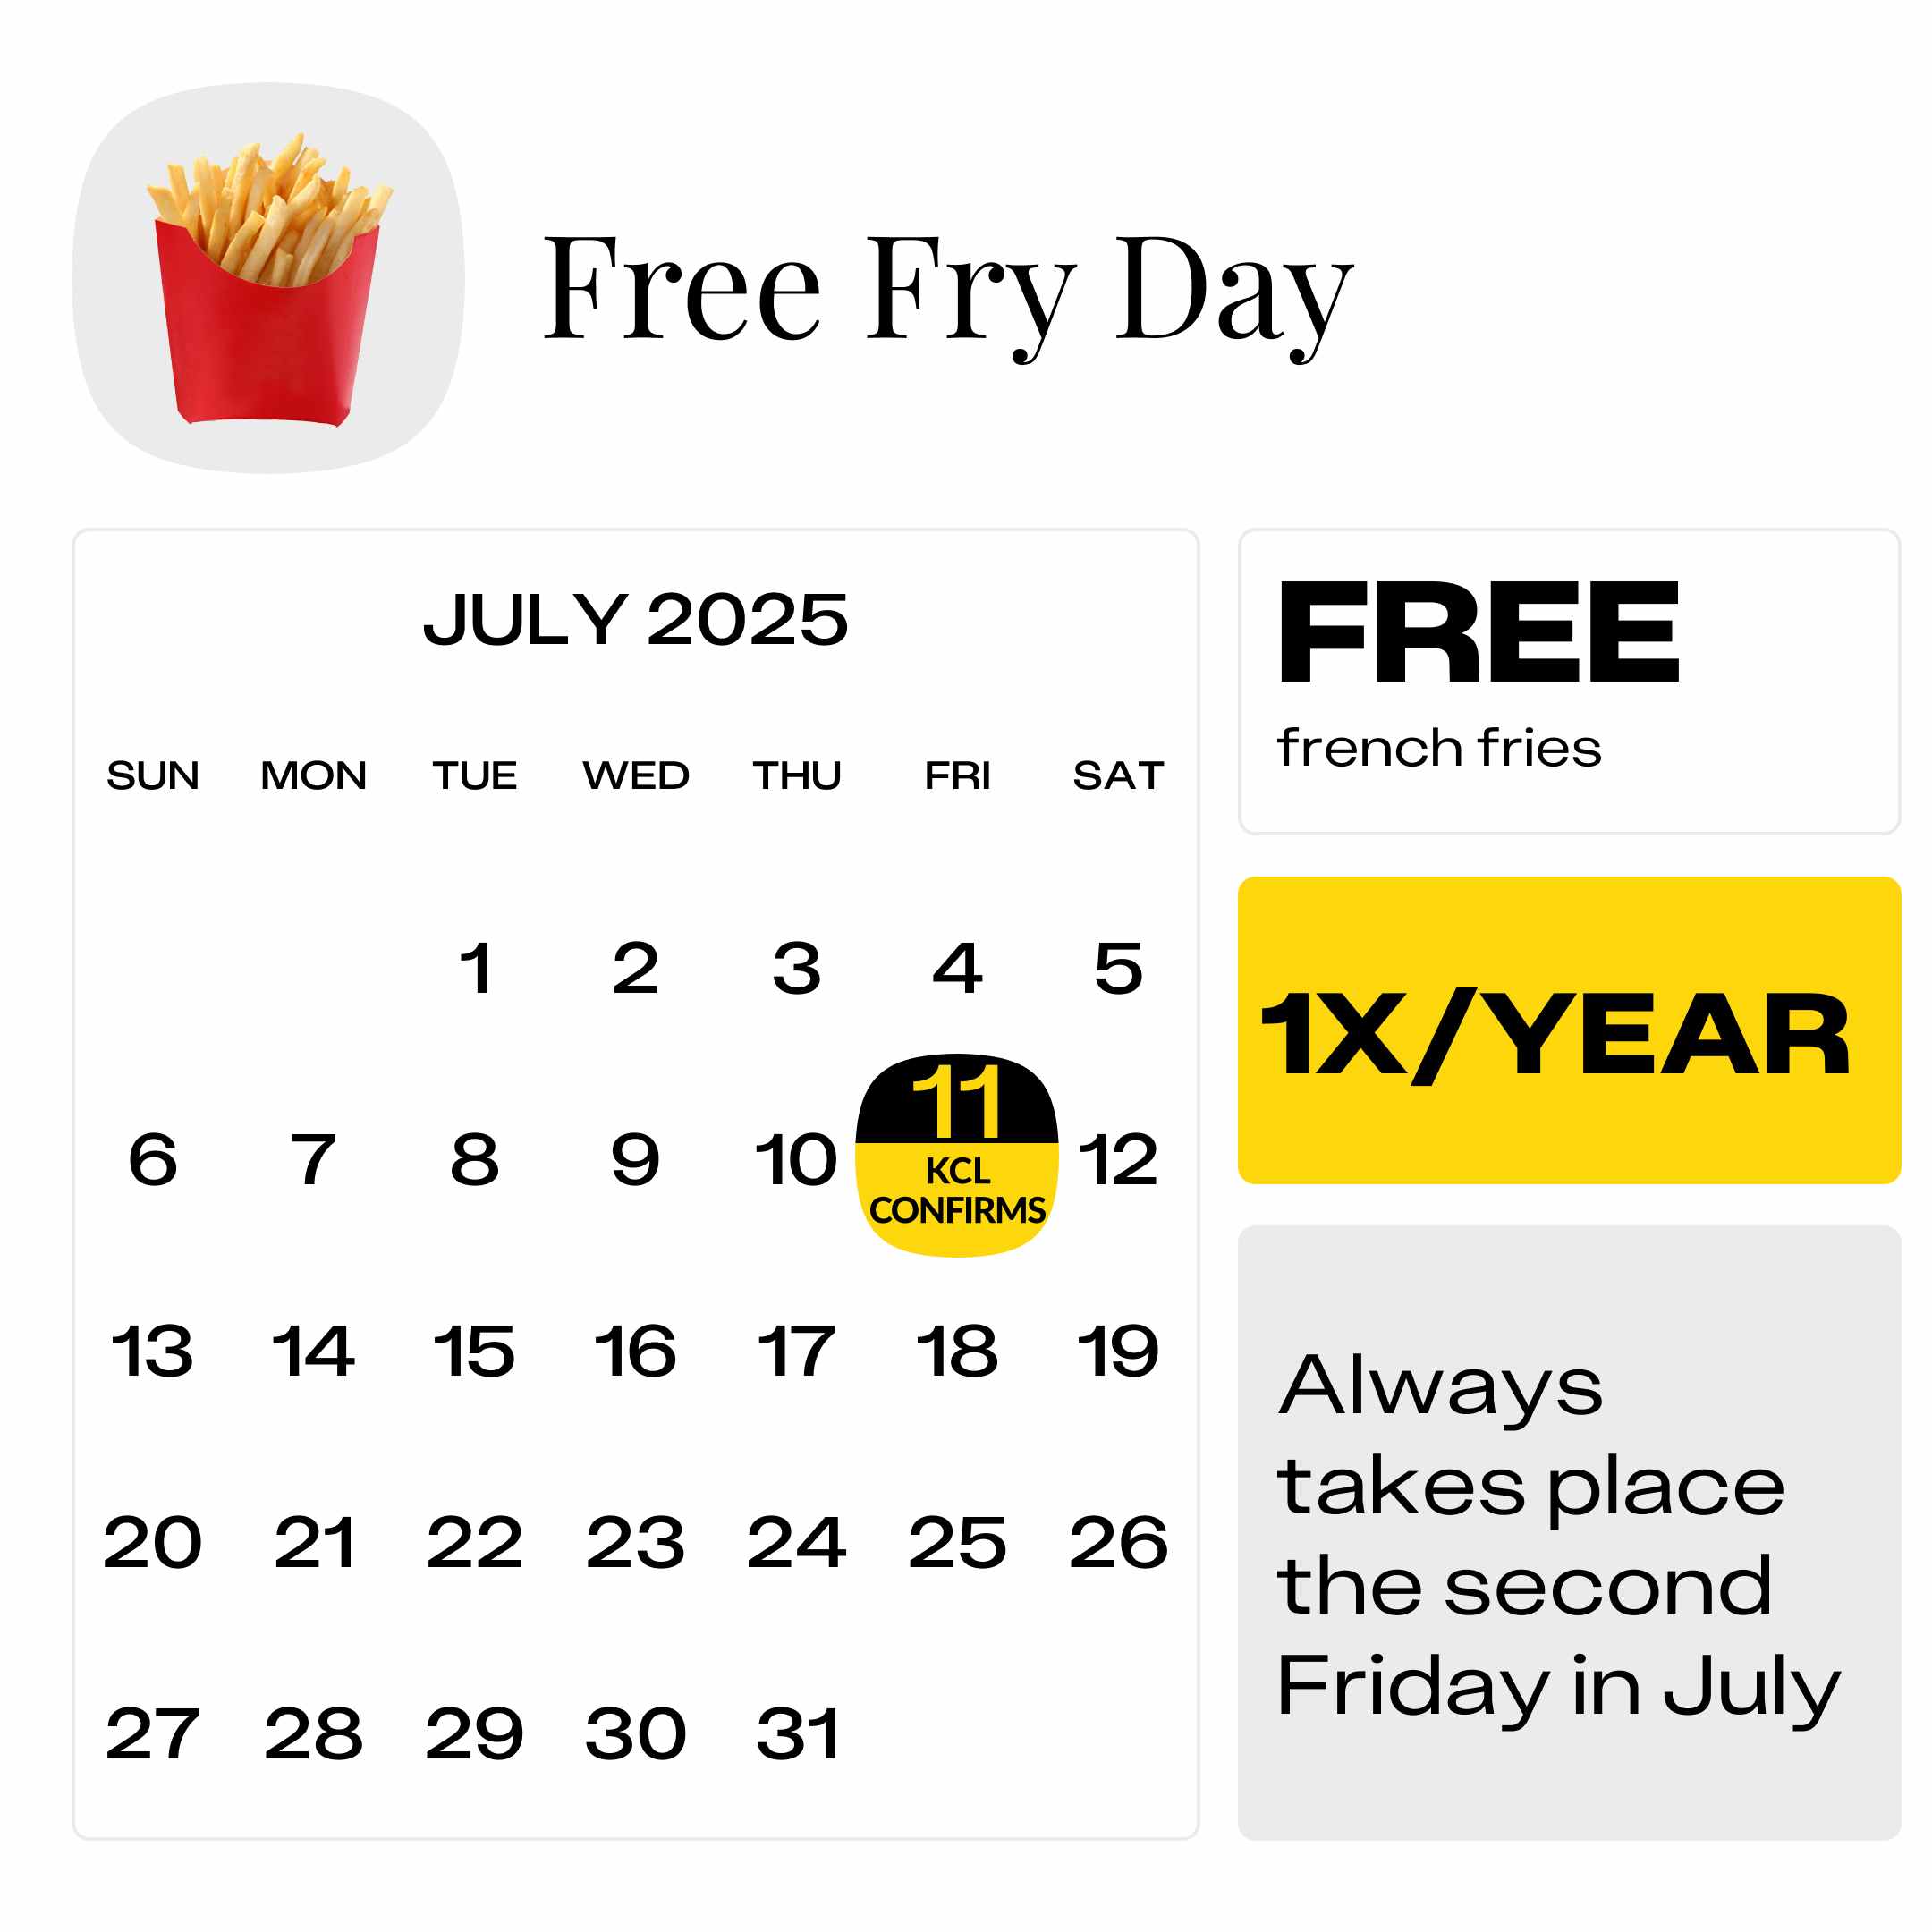 Free-Fry-Day